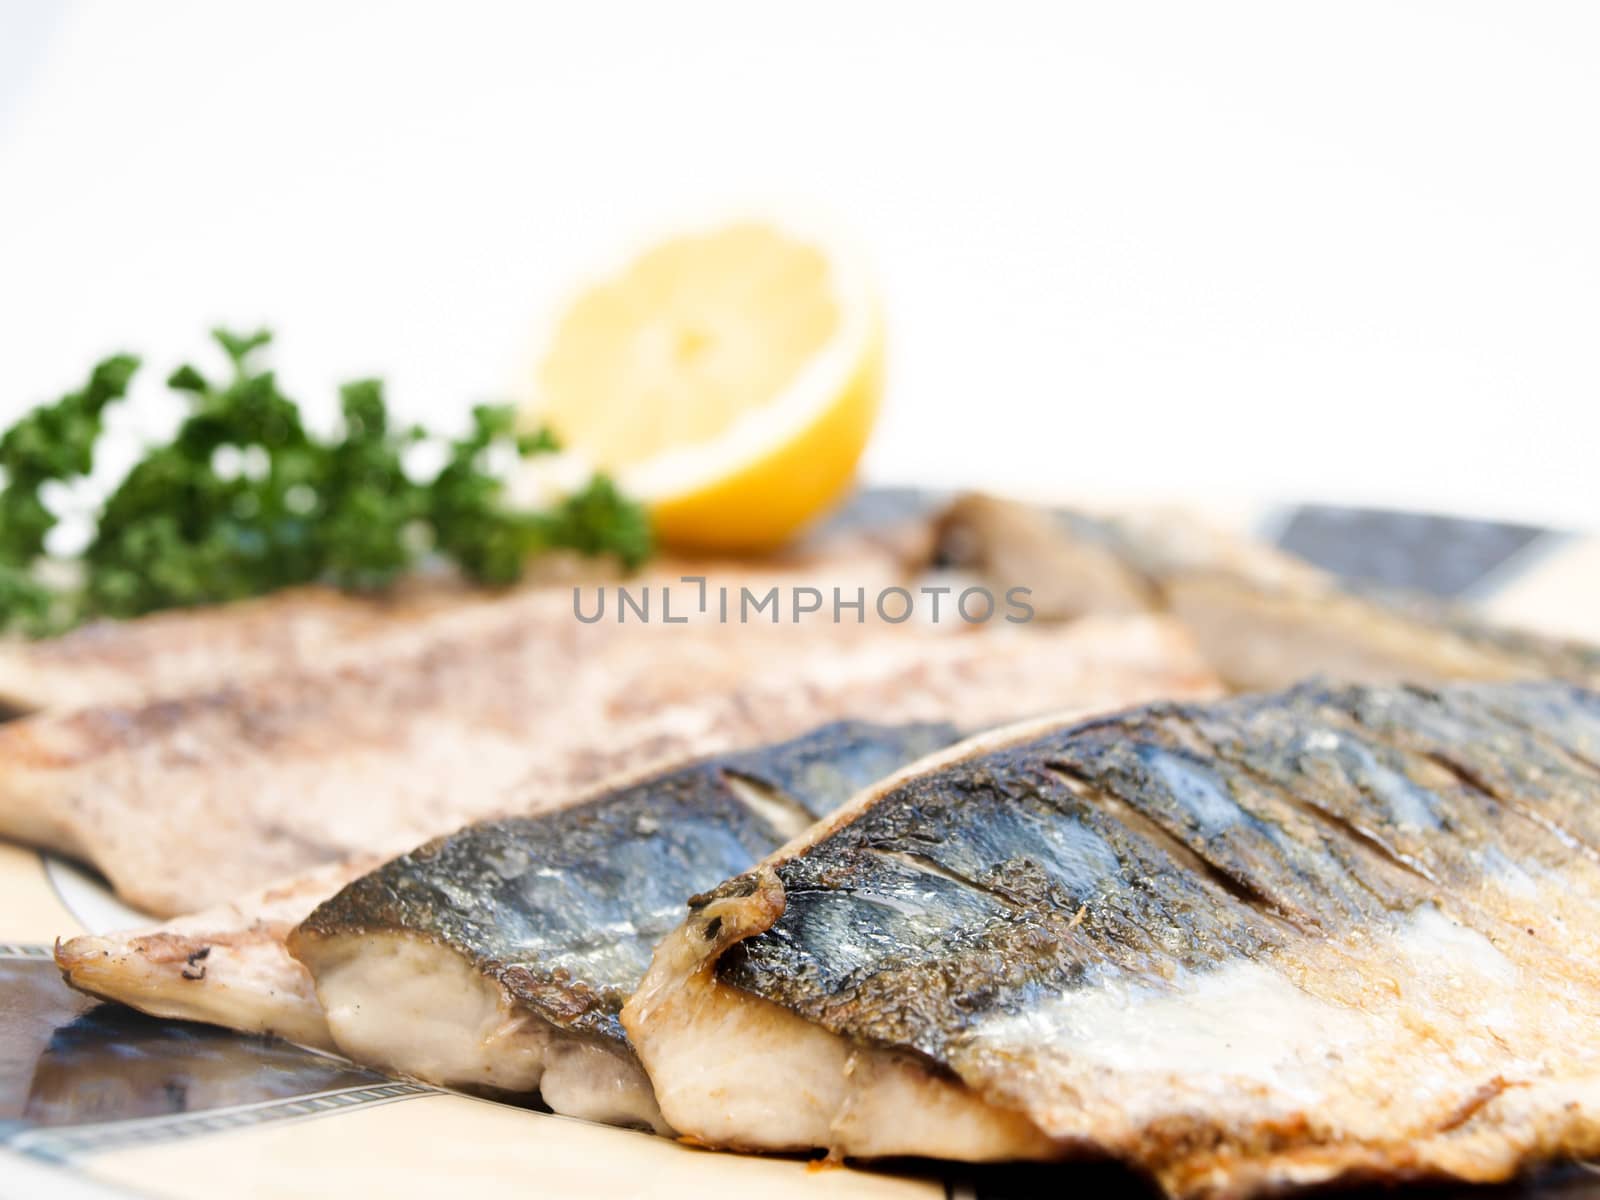 Fried filet of mackerel fish on colored plate with half a lemon and parsley